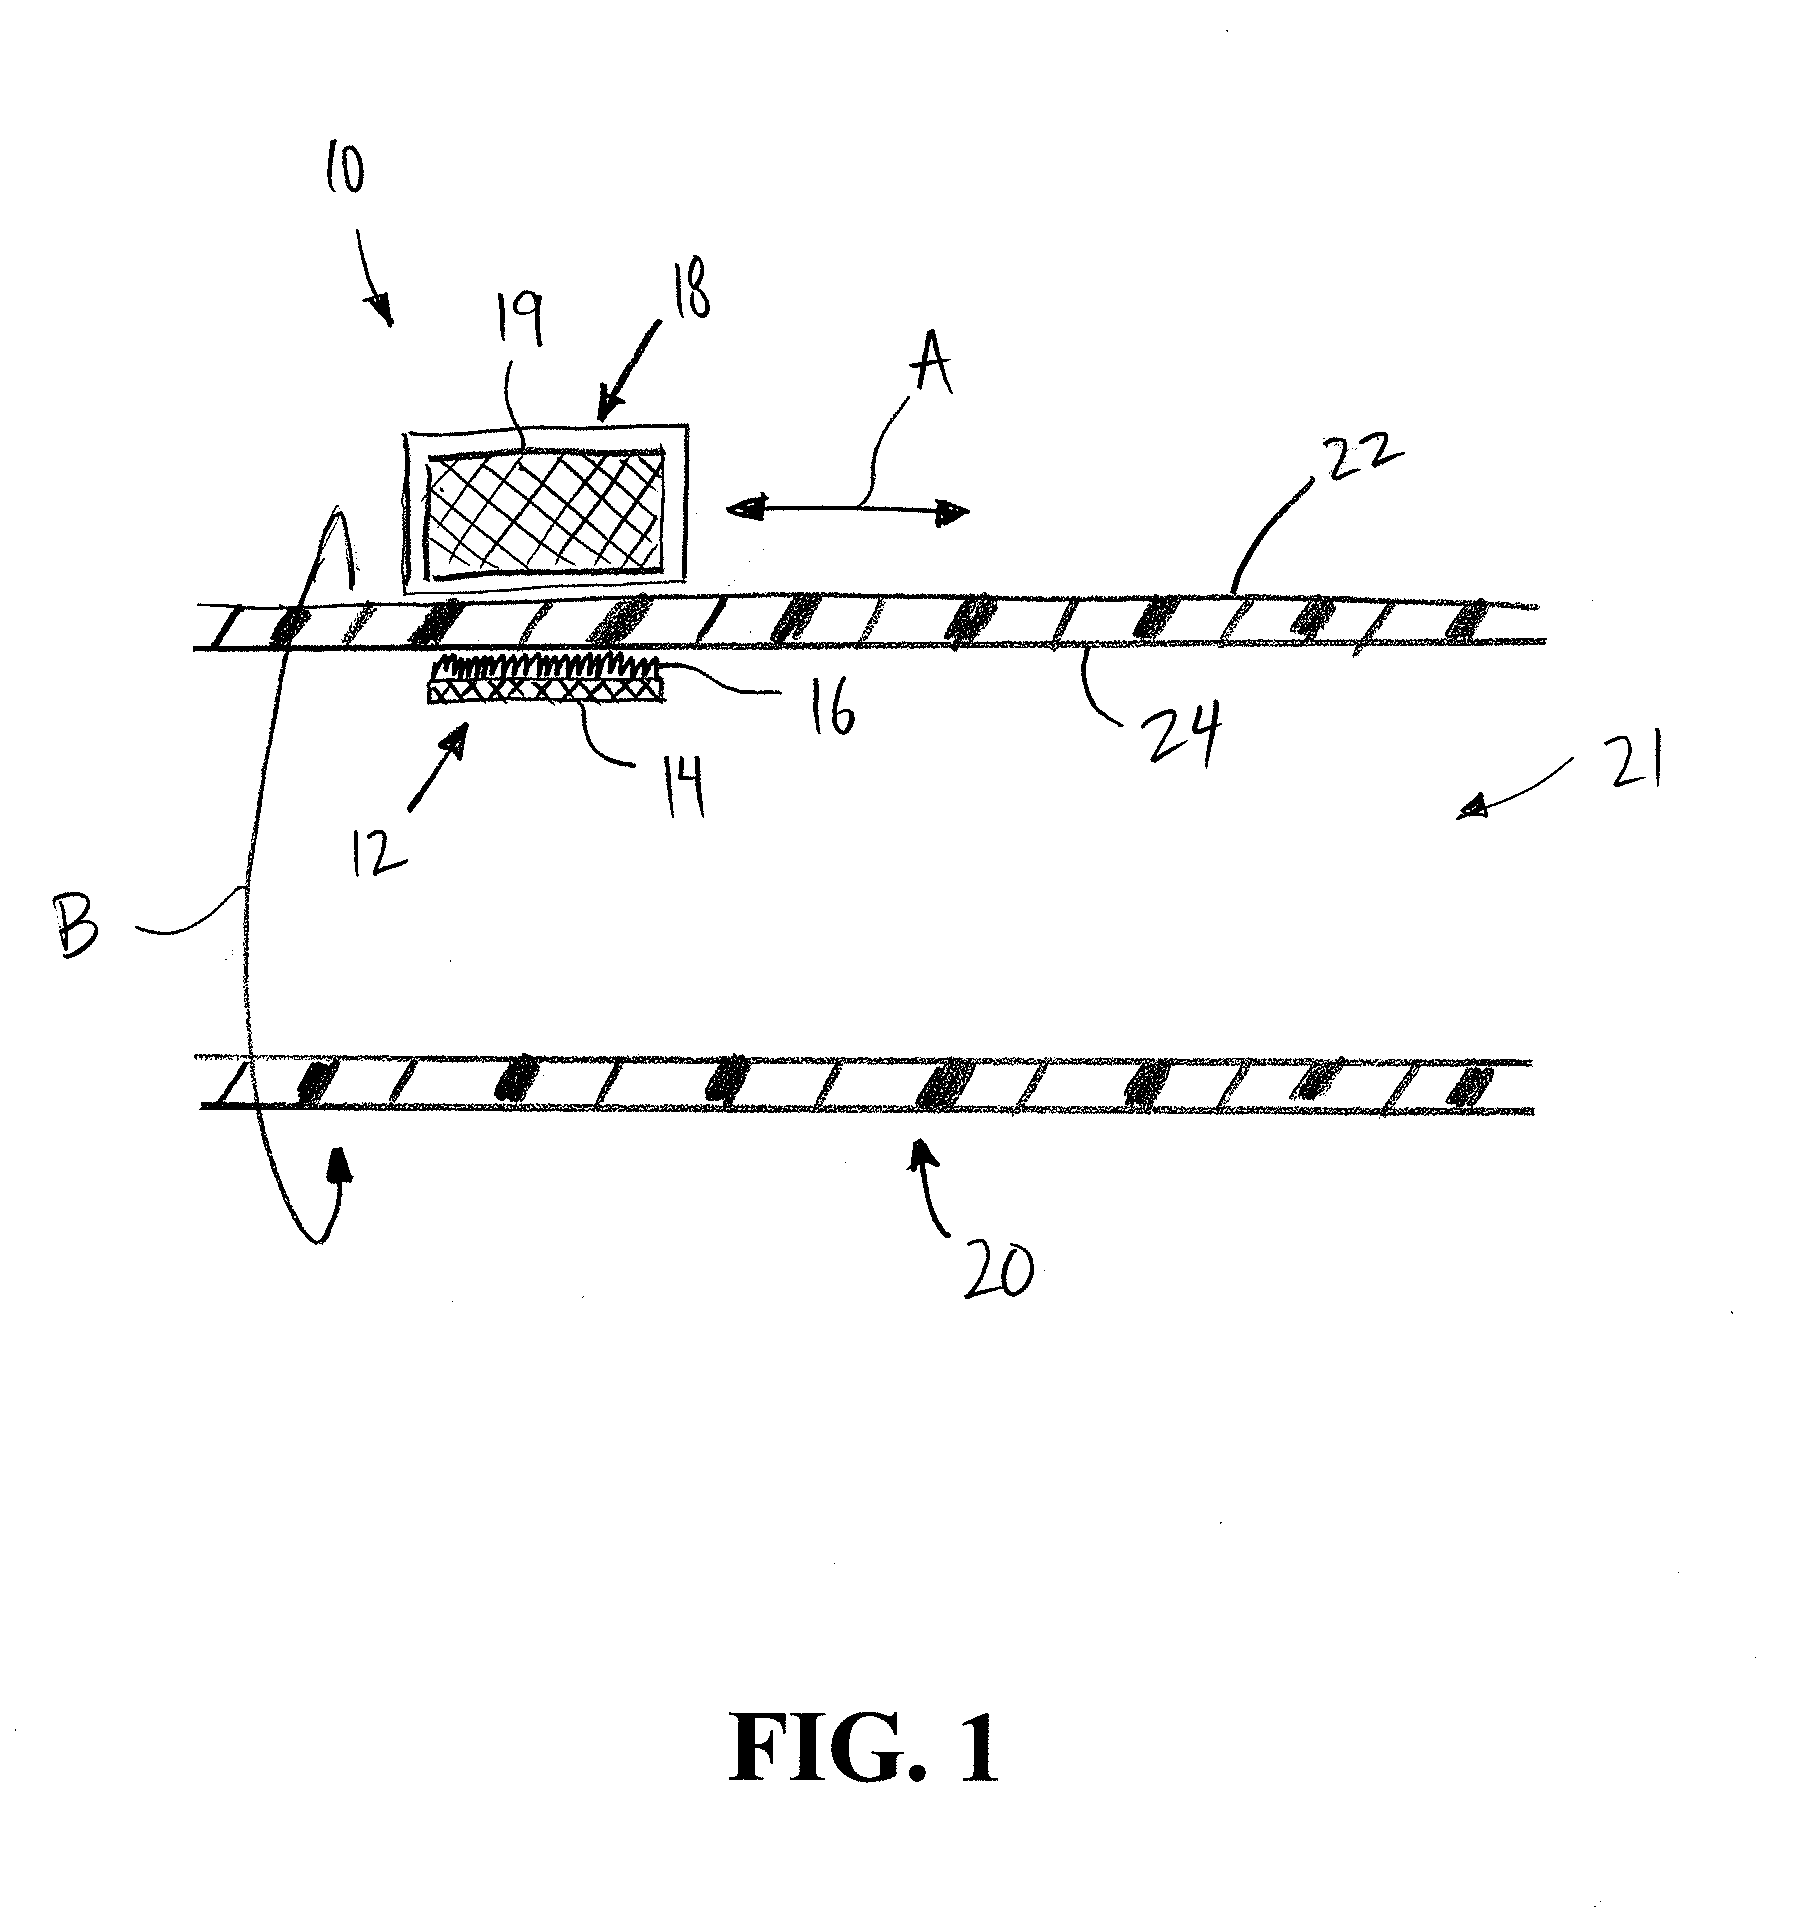 Magnetic device and method of using such device to clean the inner surface of a tube, and methods and devices for siphoning fluid